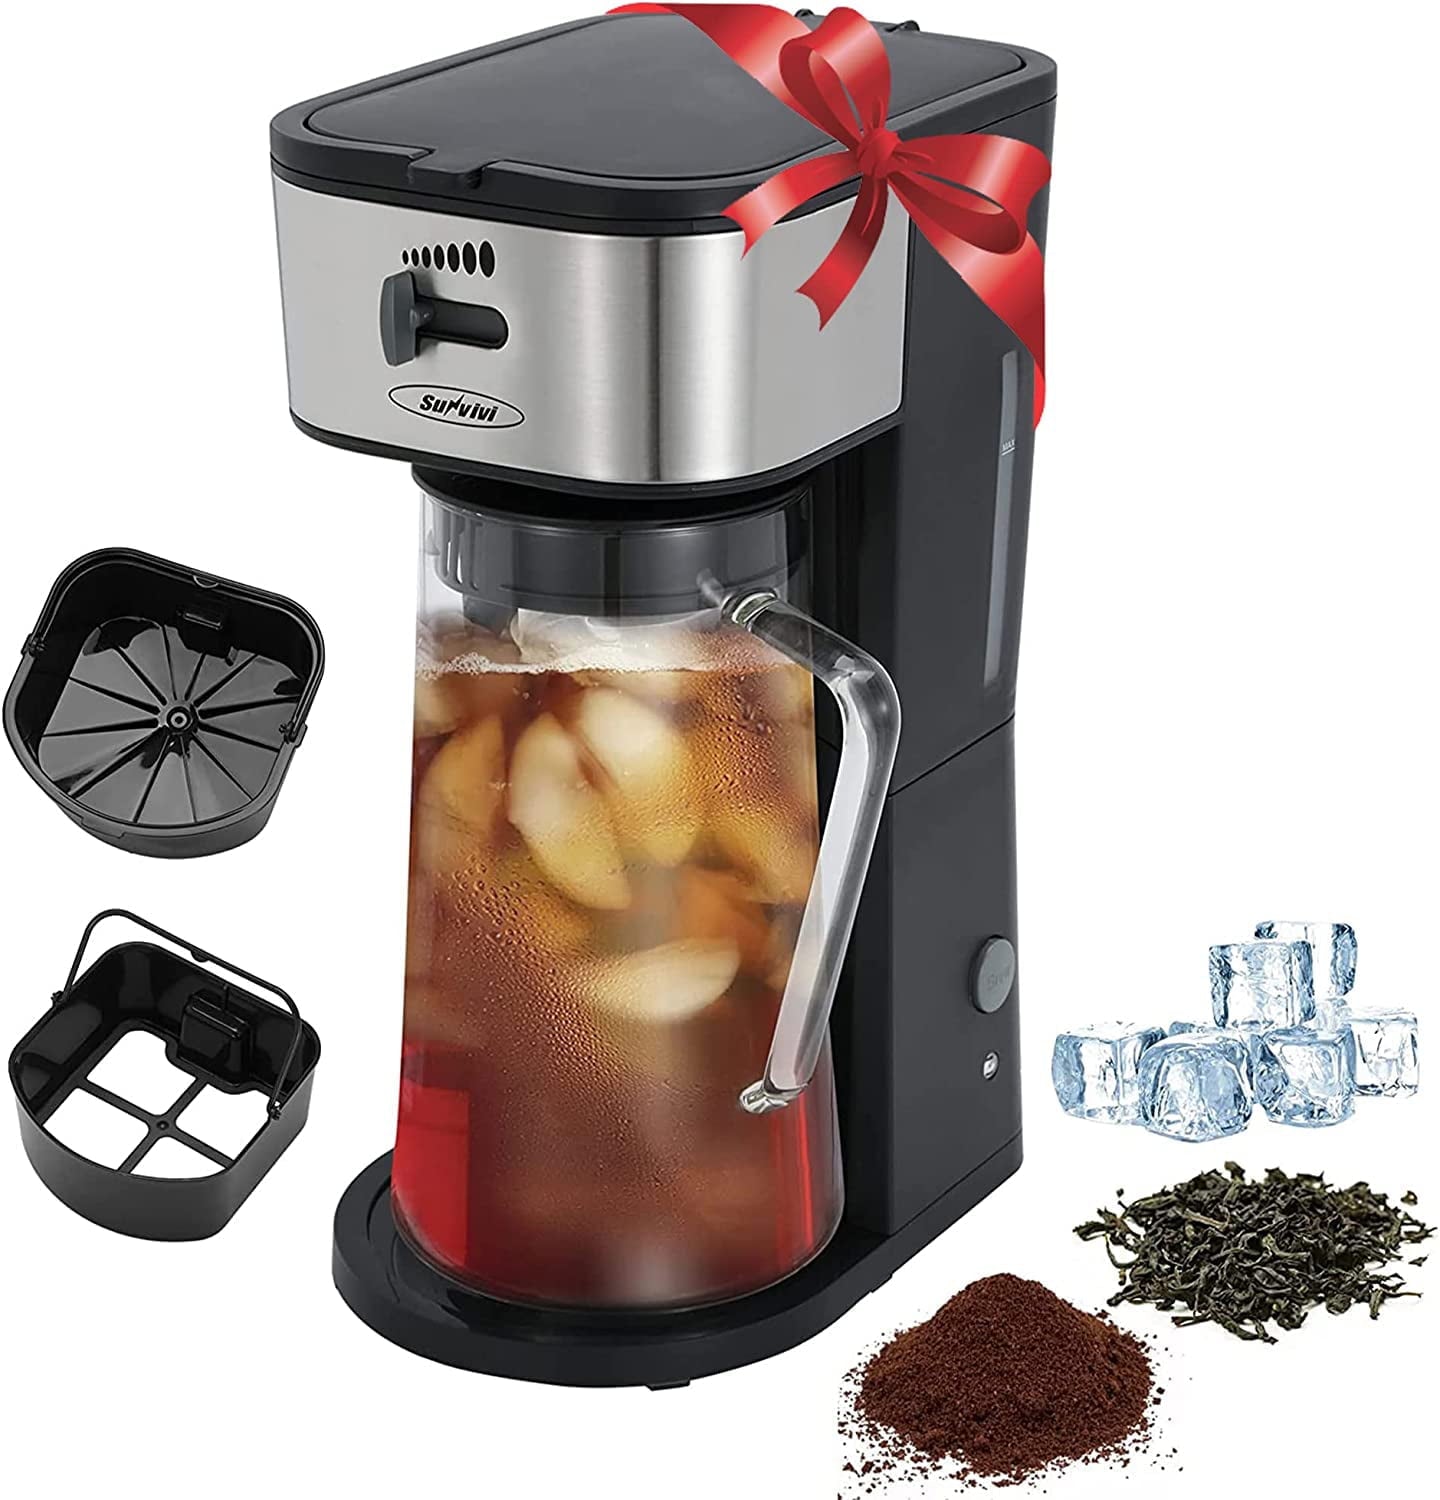 SUNVIVI 3 Quart Iced Tea Maker Iced Coffee Maker with Glass Pitcher for Hot/Cold Water,Iced Tea Coffee Maker with Strength Selector,Stainless Steel, Black